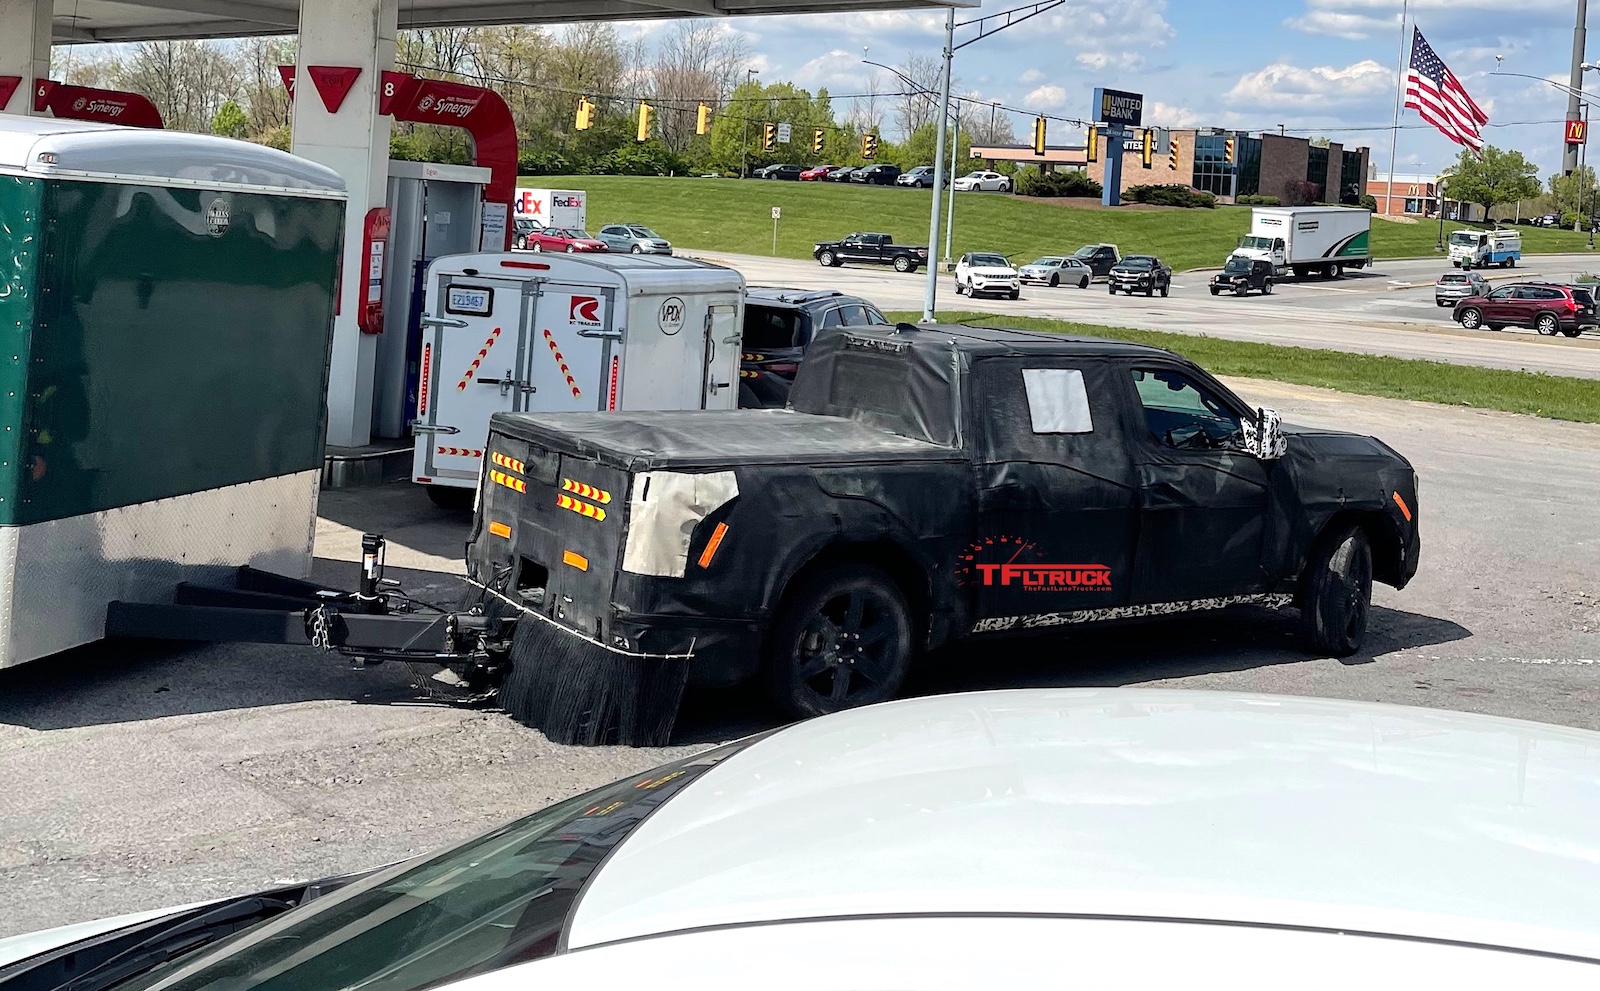 Spied! This 2022 Toyota Tundra Prototype Has a Serious Towing Package: Video - The Fast Lane Truck